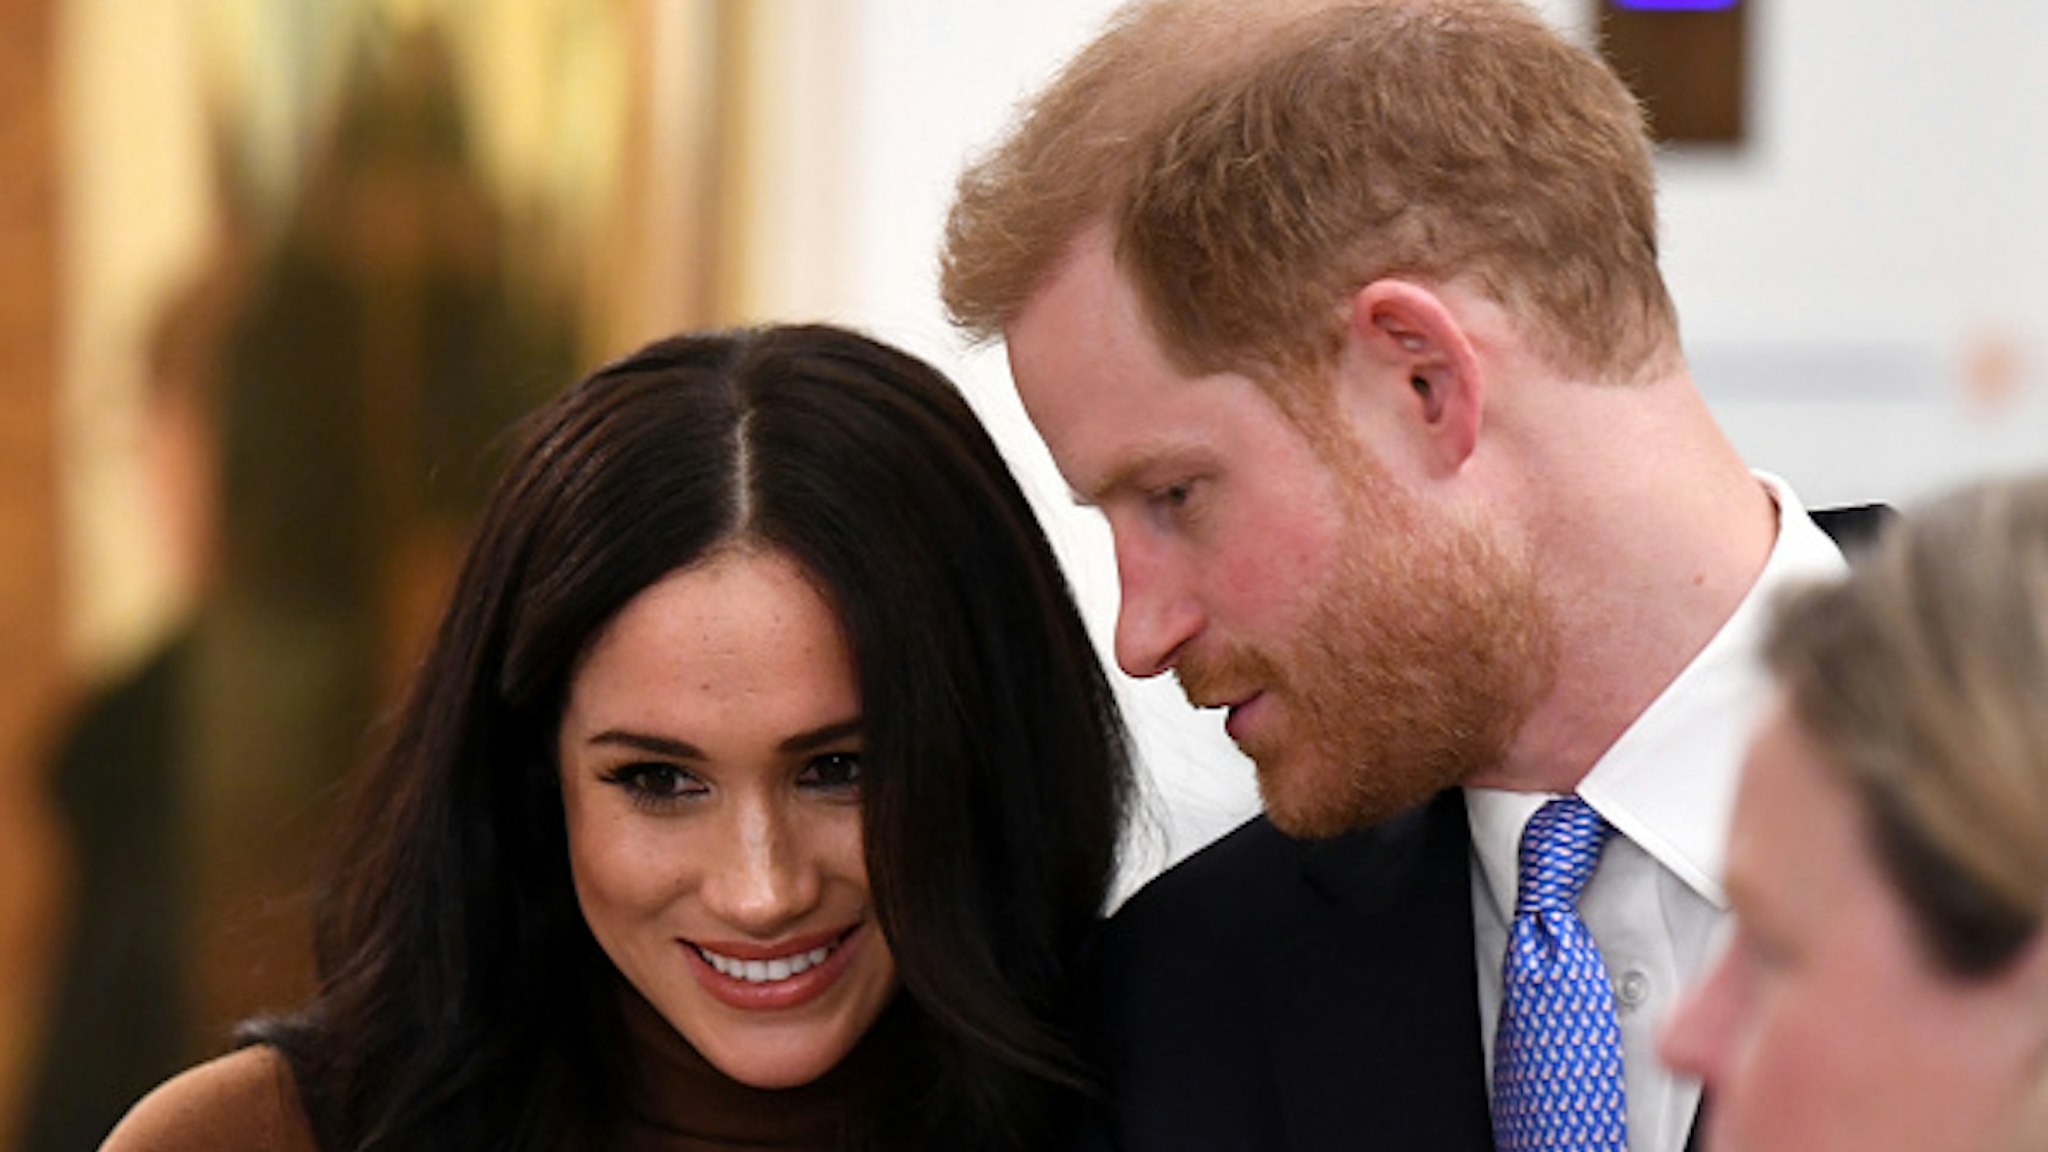 Britain's Prince Harry, Duke of Sussex and Meghan, Duchess of Sussex react during their visit to Canada House in thanks for the warm Canadian hospitality and support they received during their recent stay in Canada, in London on January 7, 2020.